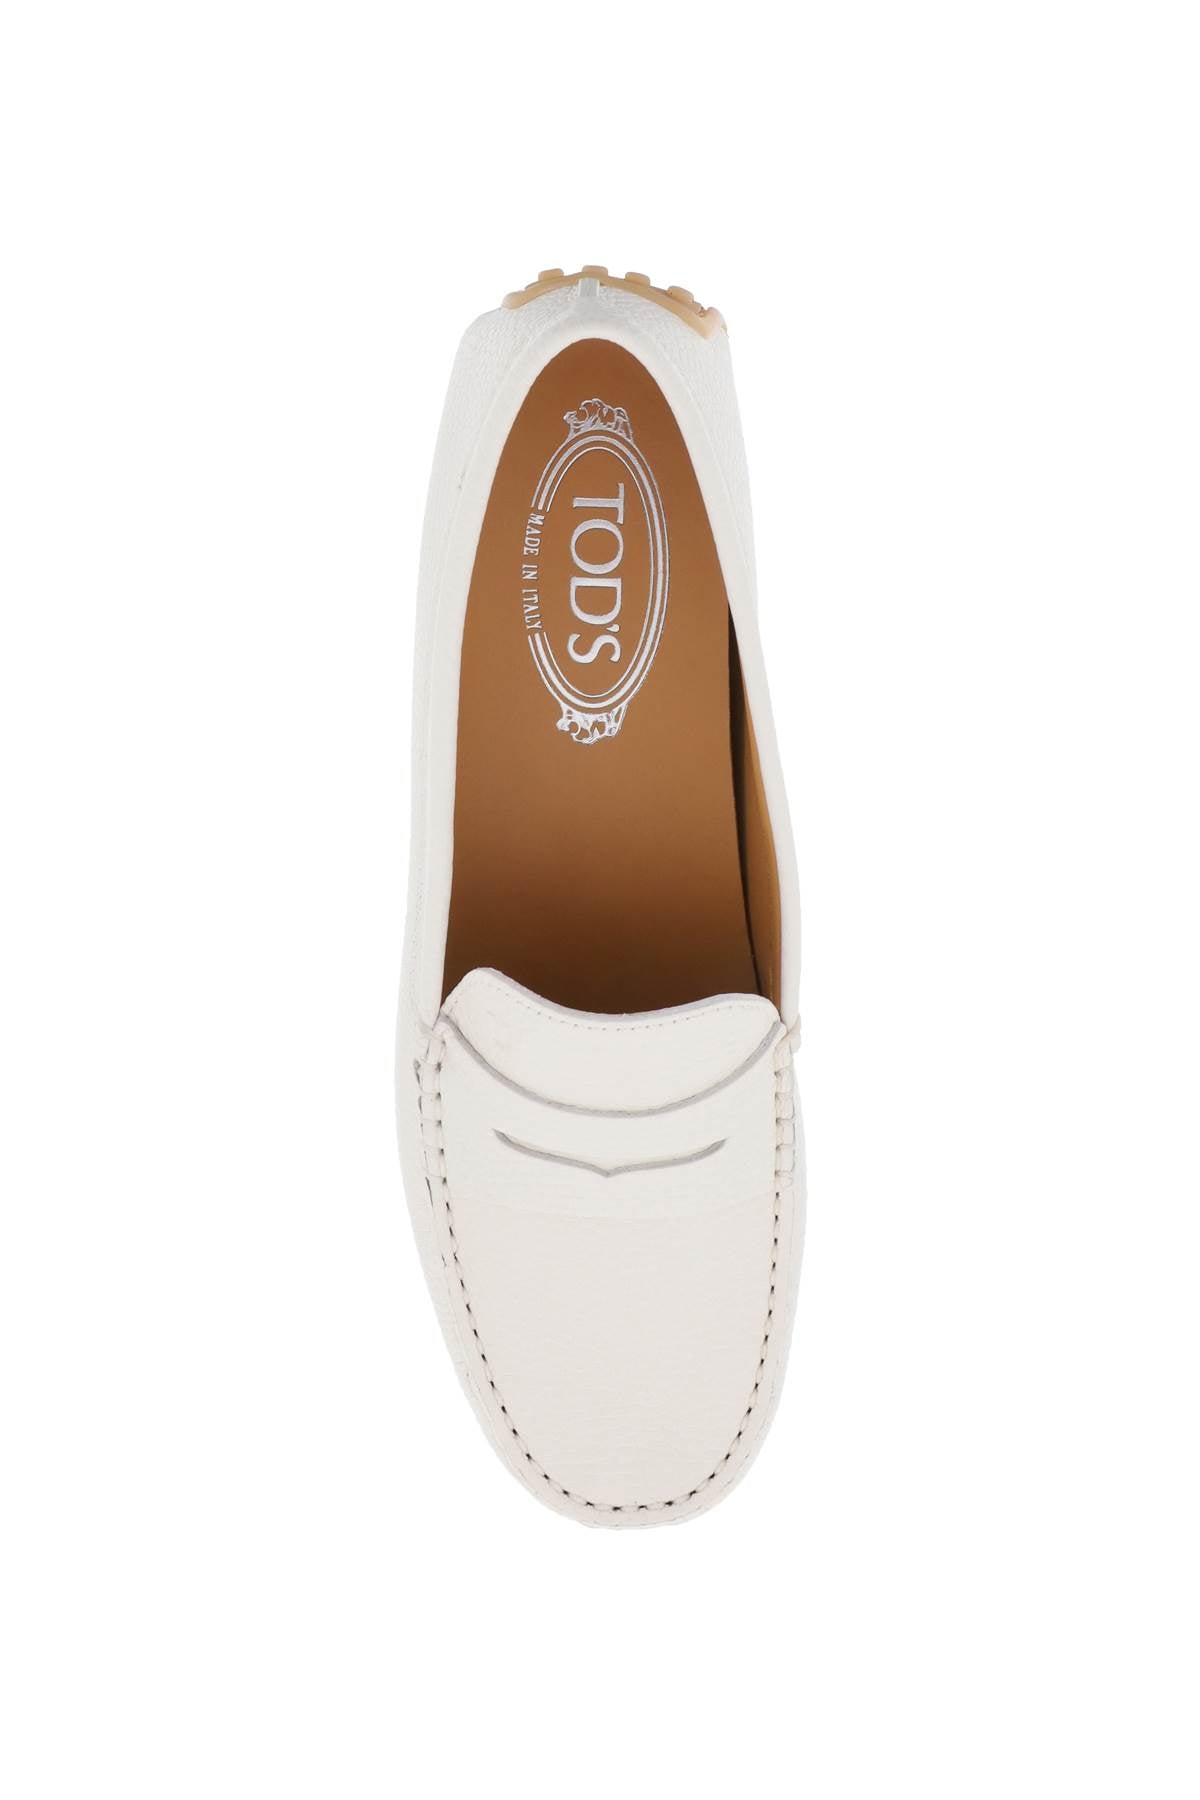 Tod'S City Gommino Leather Loafers-Tod'S-Urbanheer